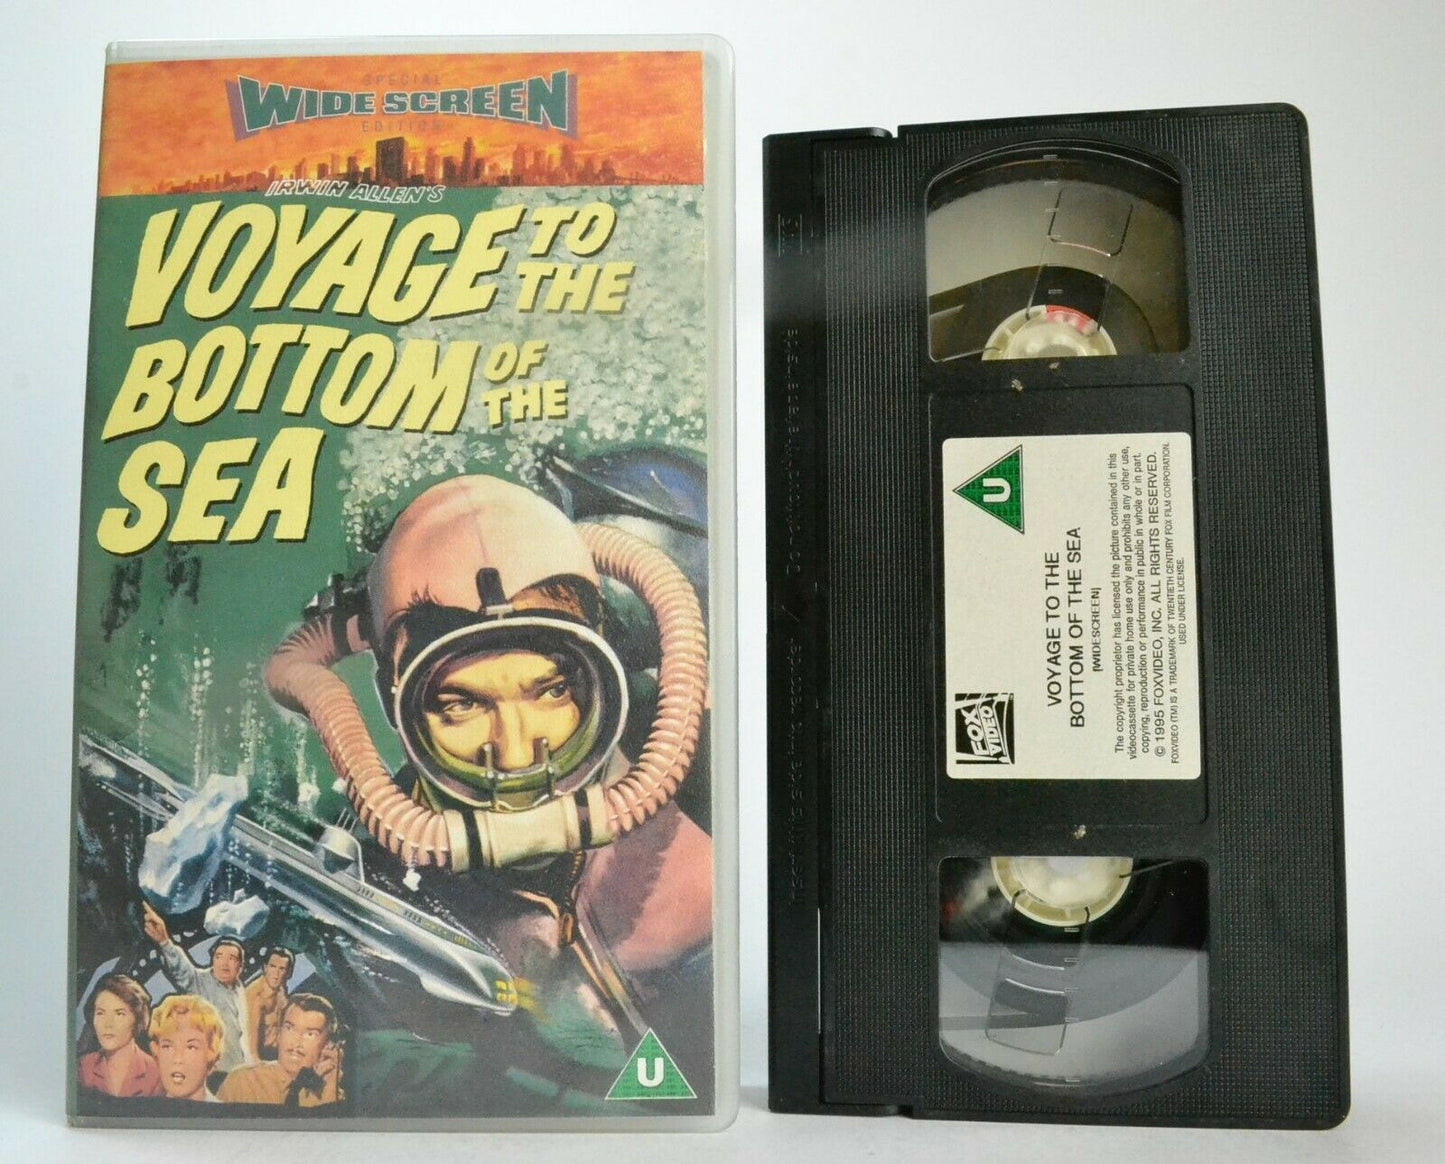 Voyage To The Bottom Of The Sea [Widescreen] Sci-Fi Action - Barbara Eden - VHS-